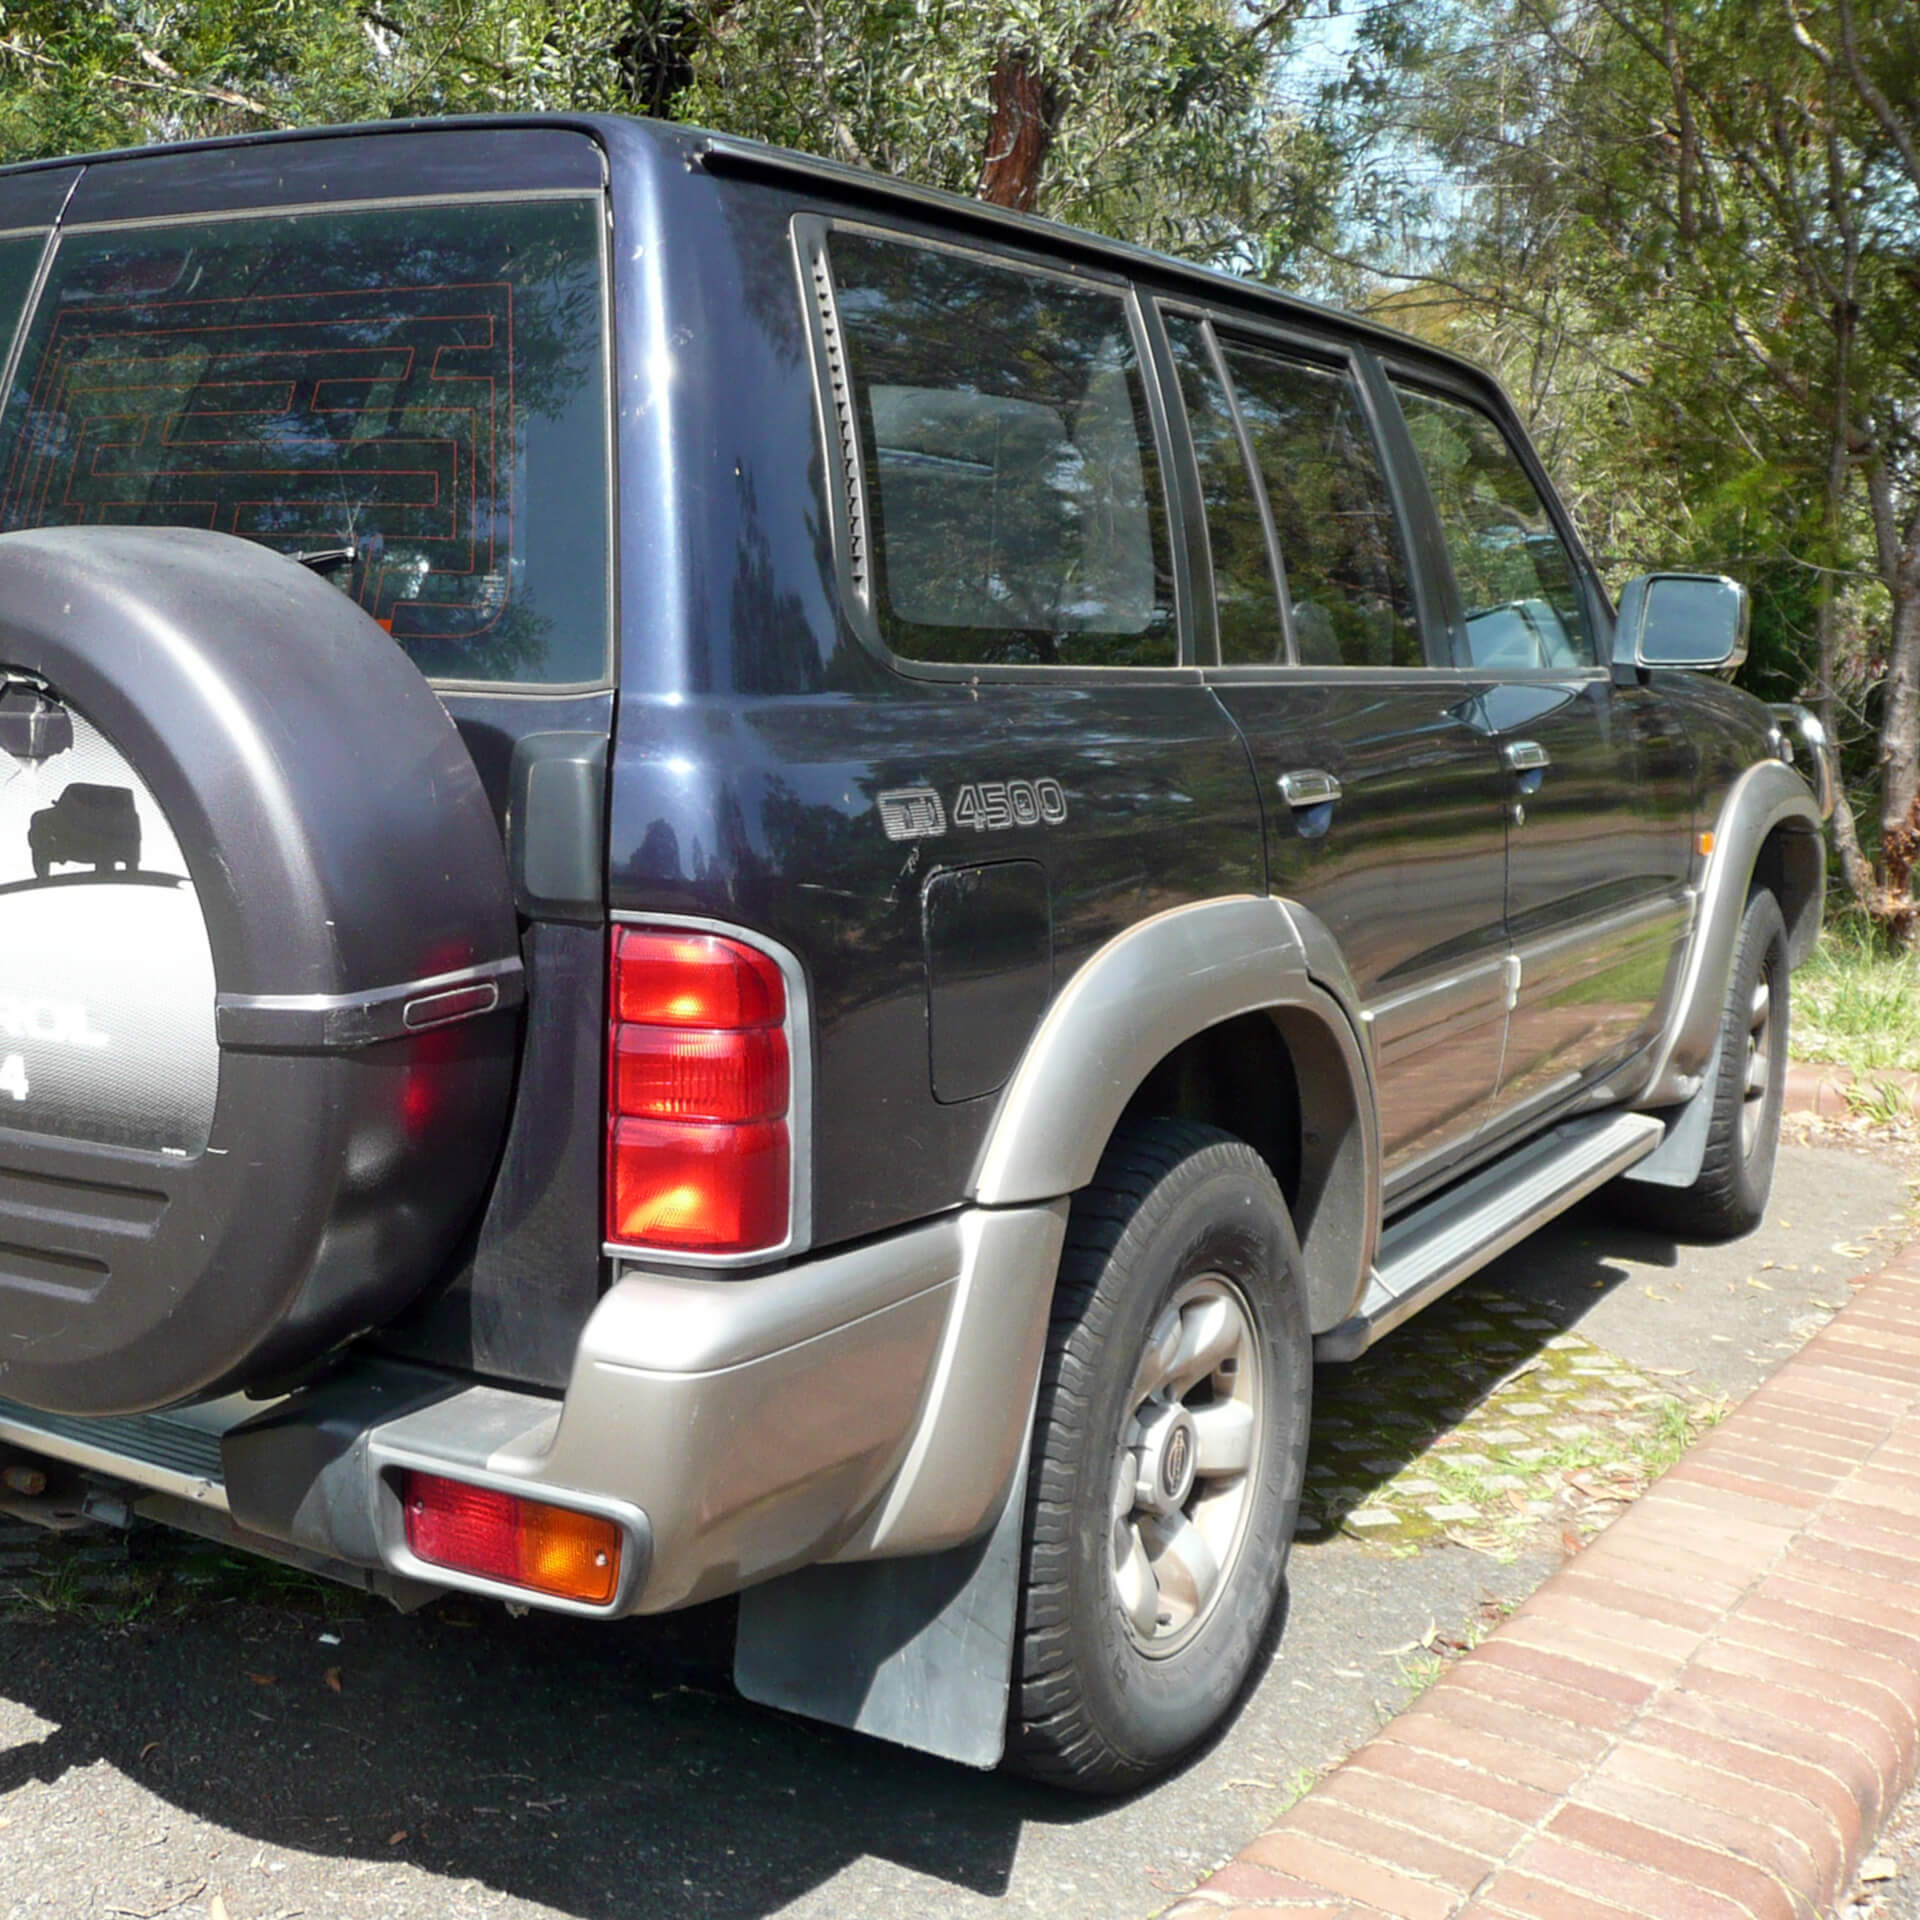 Direct4x4 accessories for Nissan Patrol vehicles with a photo of a Nissan Patrol from the rear parked on a driveway in front of trees